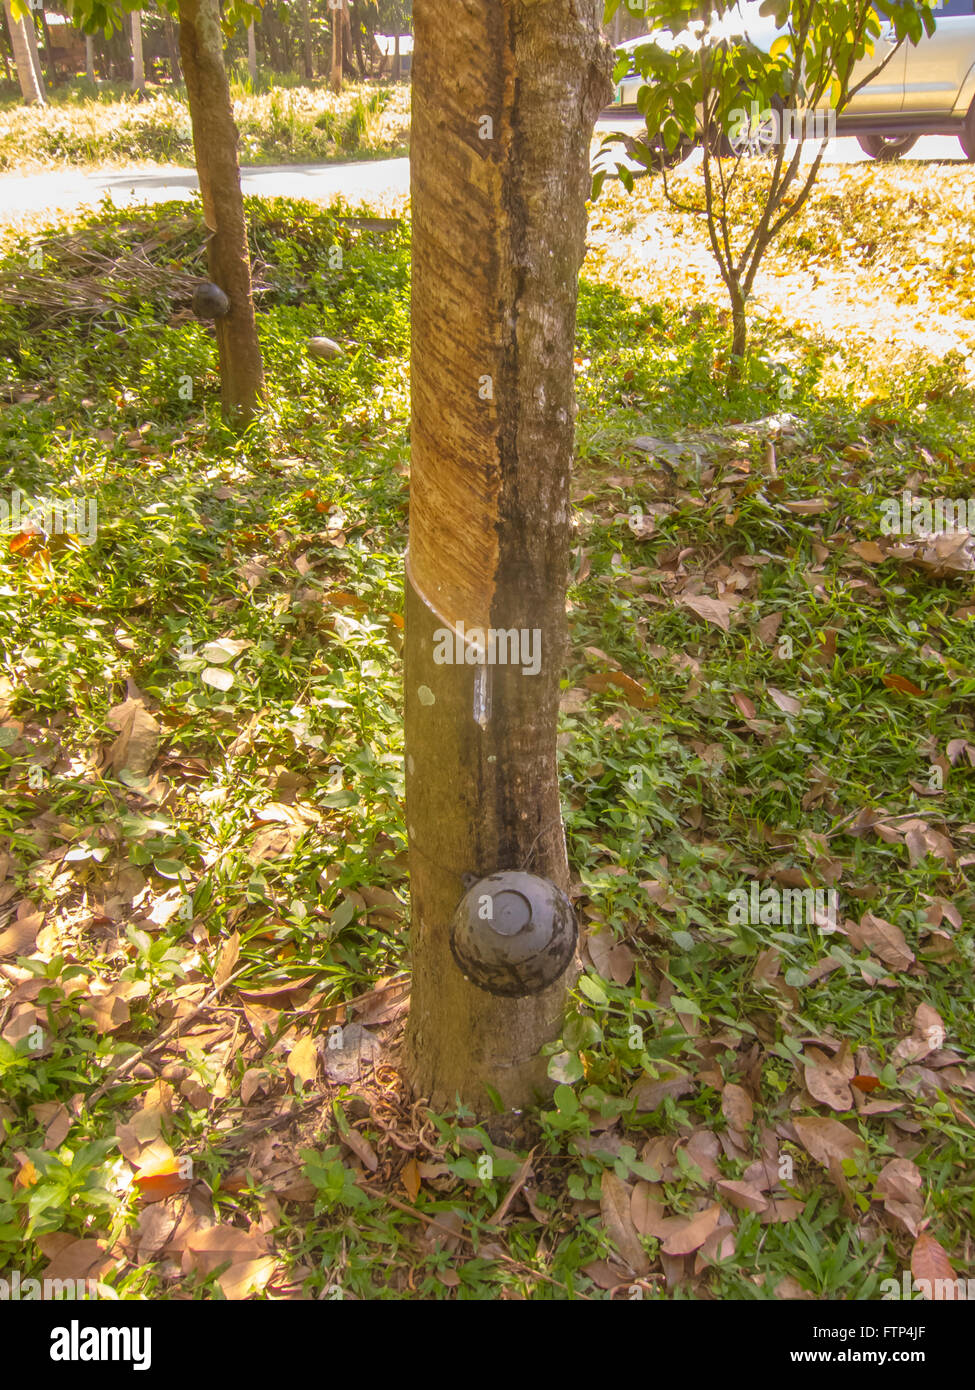 Rubber plantation on the island of Kho Yao Yai Thailand. Rubber tree showing the incision in the tree bark. Stock Photo